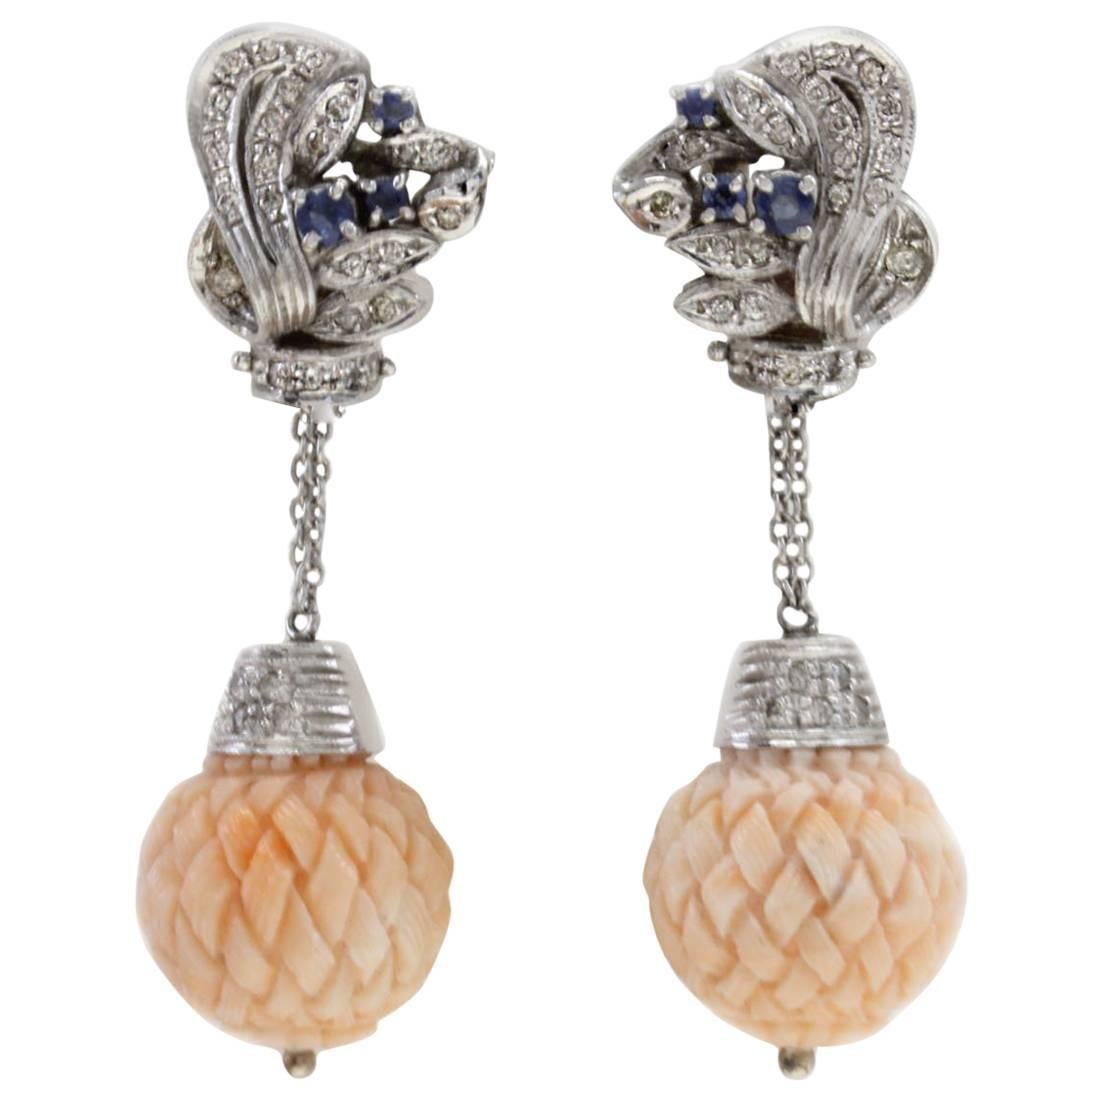 Diamonds, Blue Sapphires, Engraved Coral Spheres, White Gold Clip-on Earrin